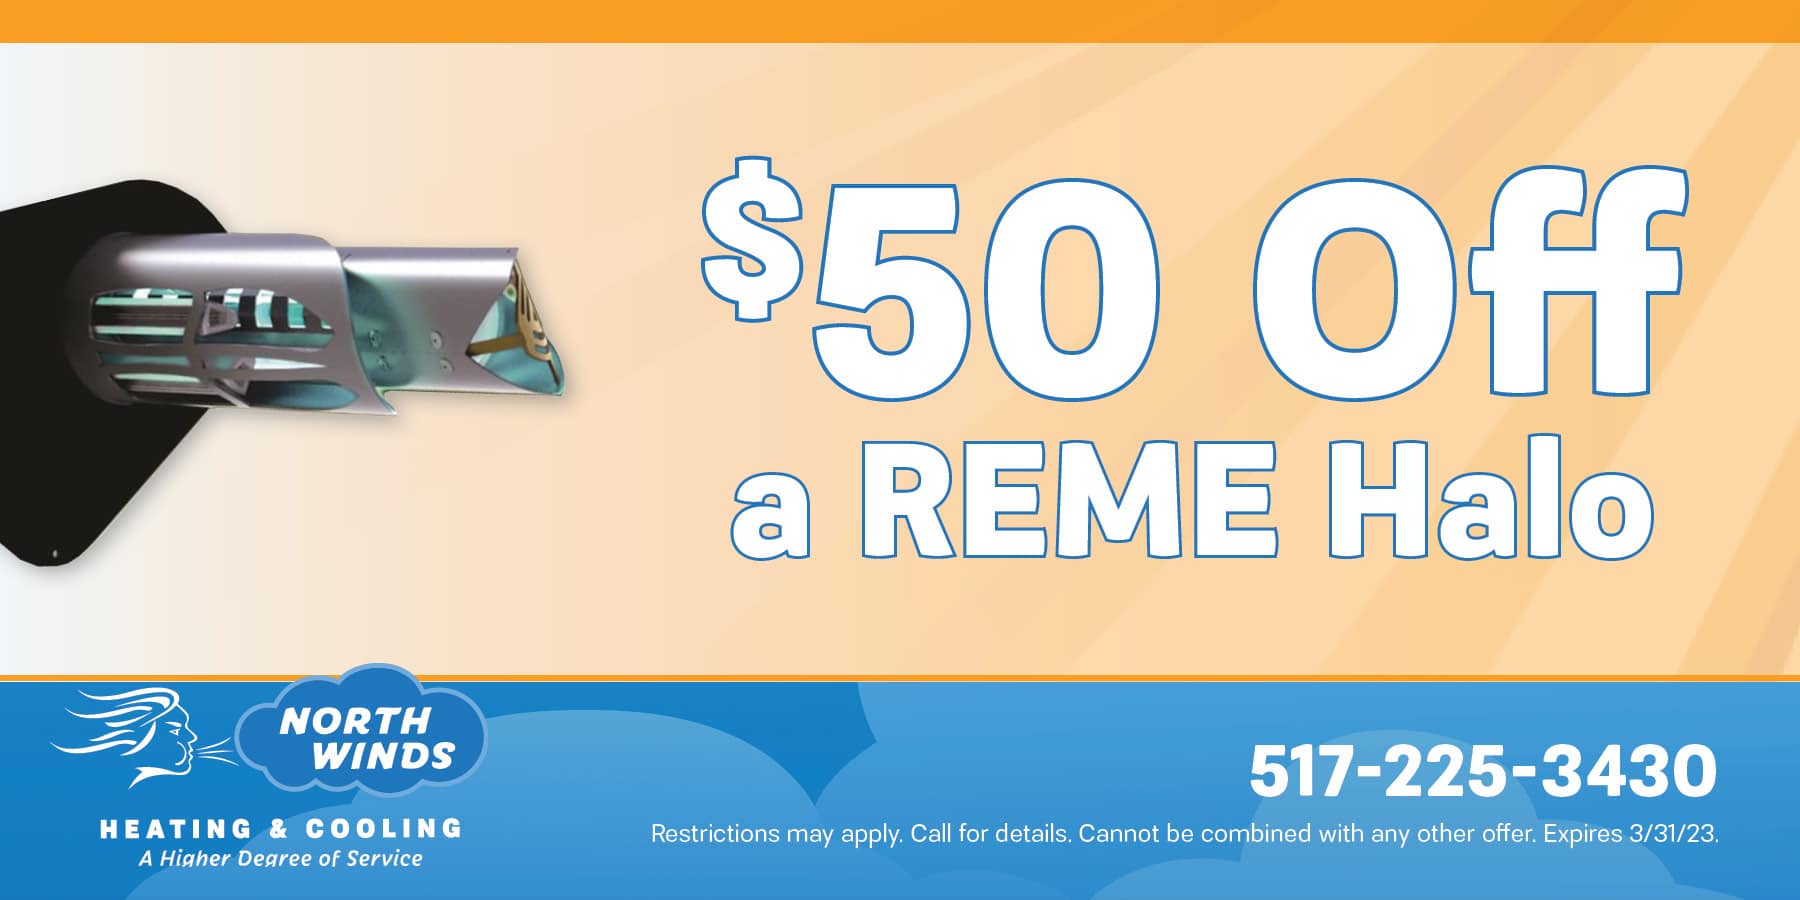 fifty dollars off a reme halo. Restrictions may apply. call for details. cannot be combined with any other offer. expires march thirty one, twenty twenty three